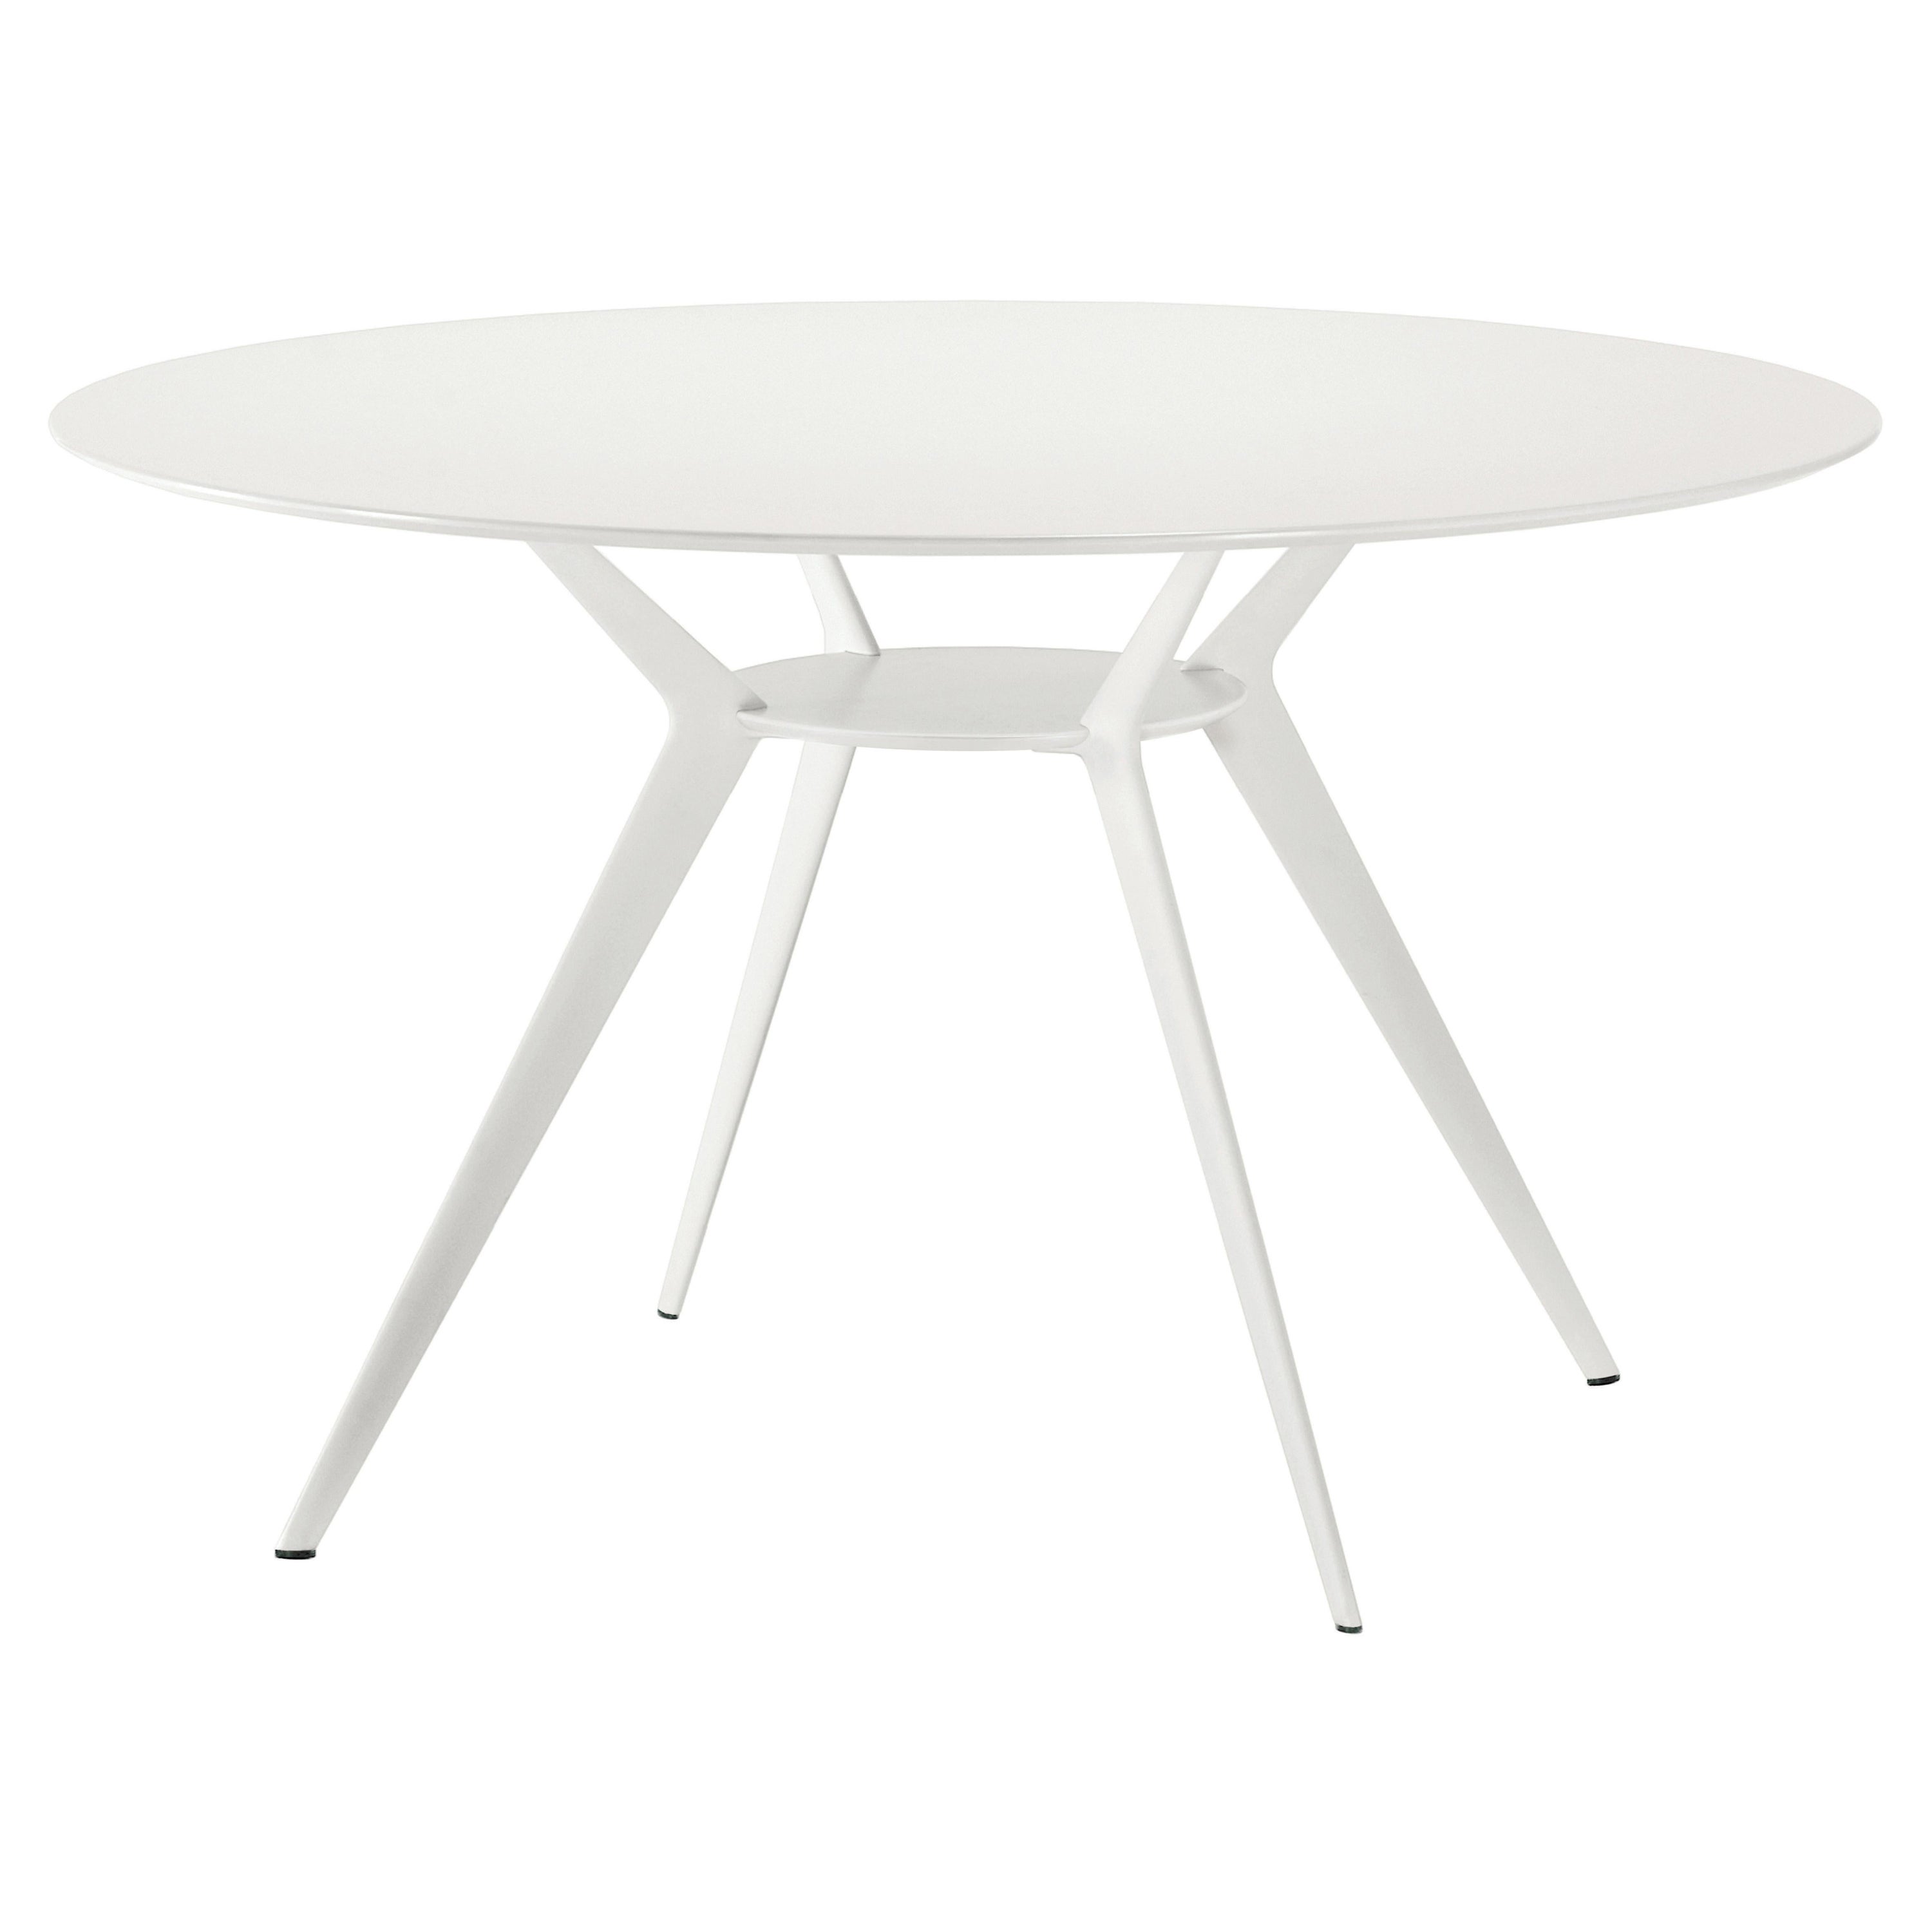 Alias Biplane 402 Table in White MDF Top with White Lacquered Aluminium Frame For Sale